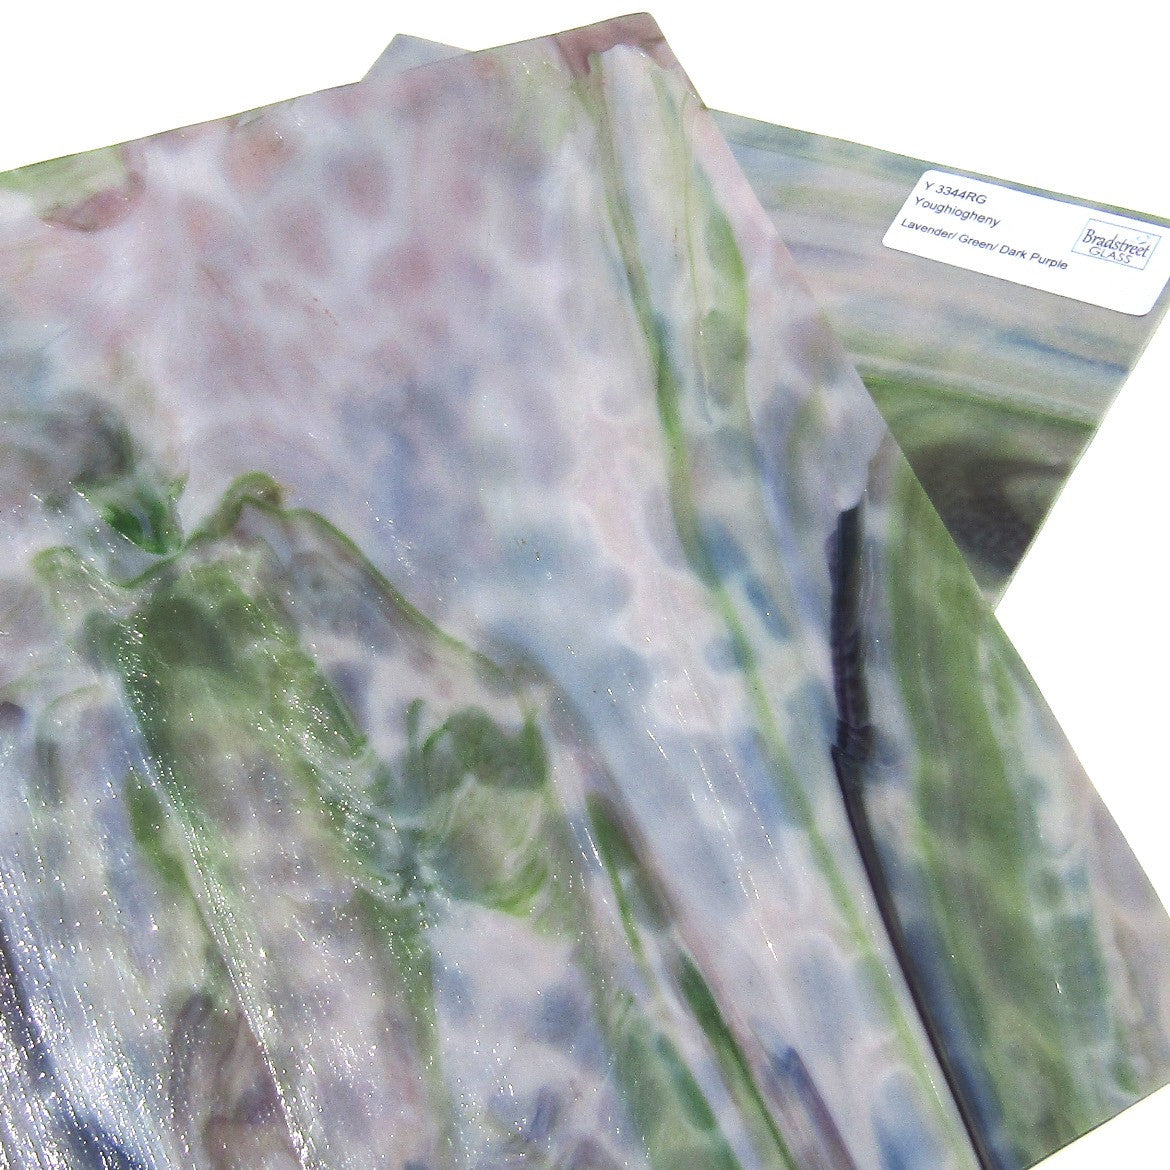 Youghiogheny Y3344RG Stained Glass Sheet, Lavender Green Dark Purple Mottled Opaque Reproduction Glass